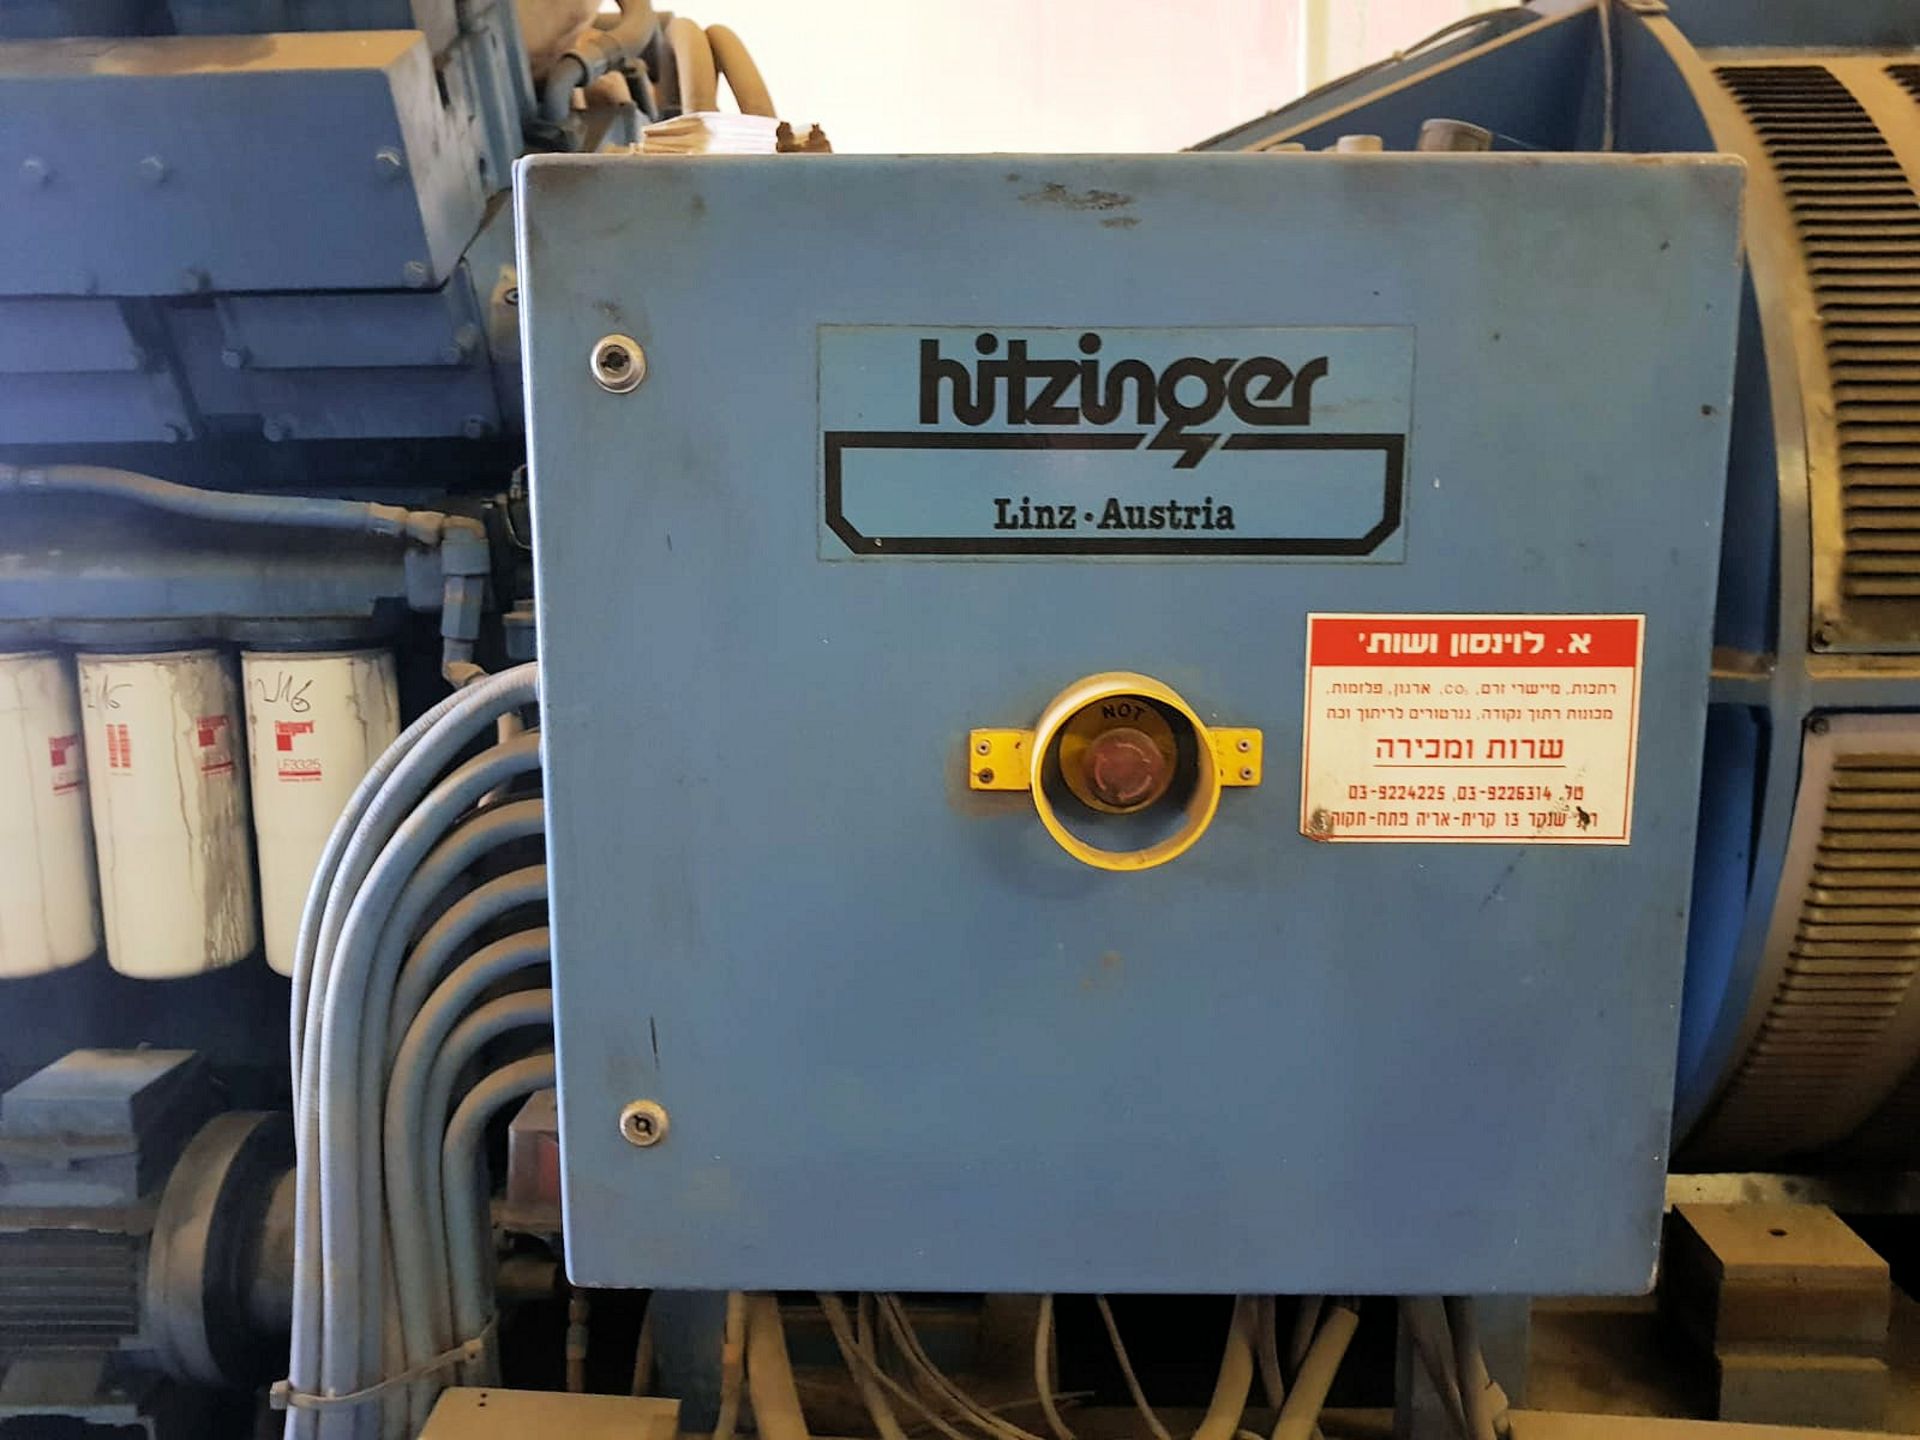 1 x 1987 Hitzinger SGS 9D 040 Generator - Only 800 Hours Use - Ref: T4UB/HZ - CL333 - Location: - Image 13 of 20